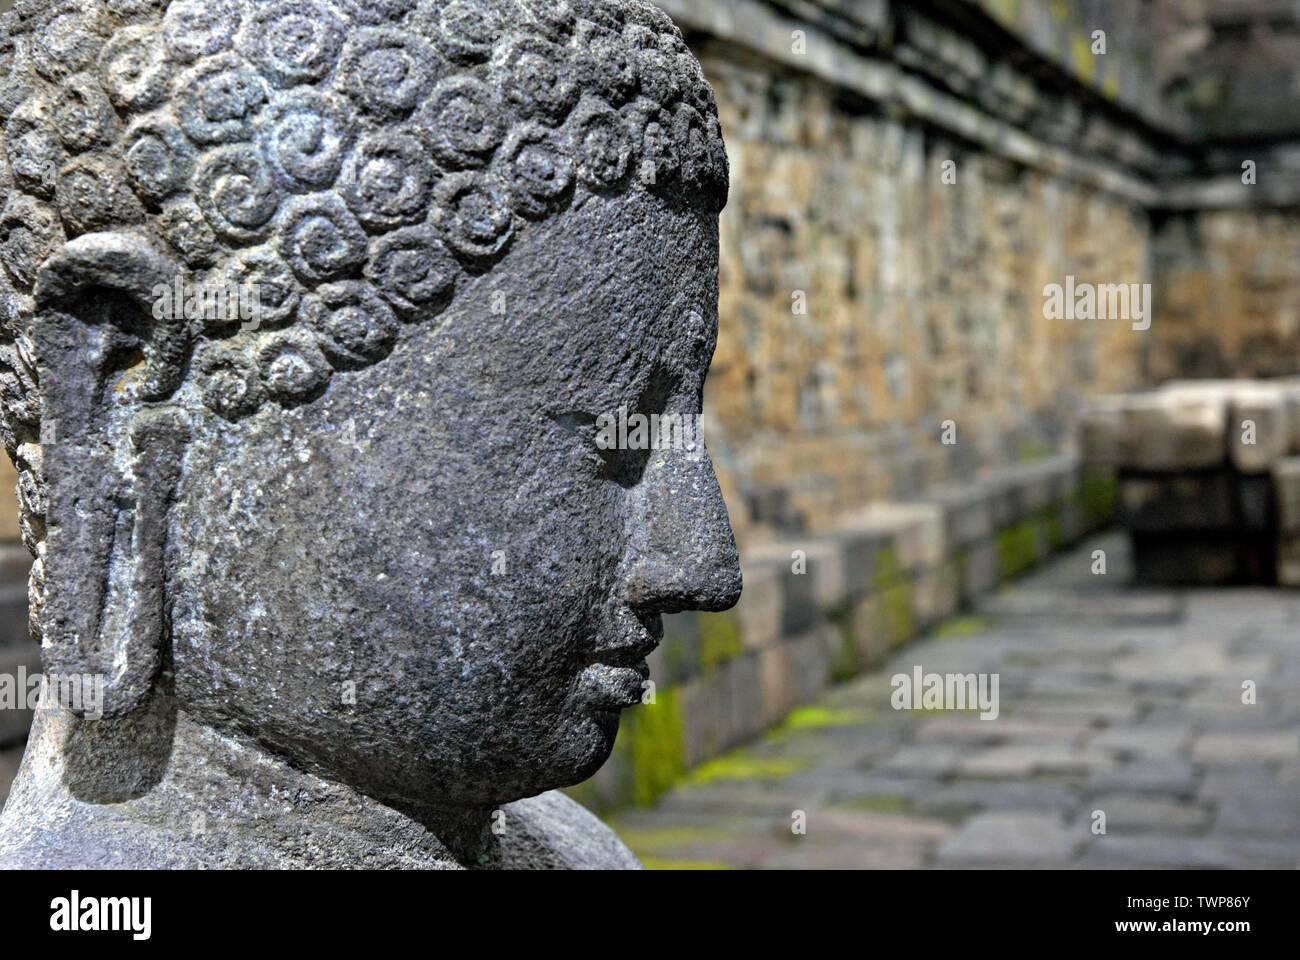 The Buddha statue in Borobudur. Borobudur is a 9th-century Mahayana Buddhist temple. It is the world's largest Buddhist temple. Stock Photo